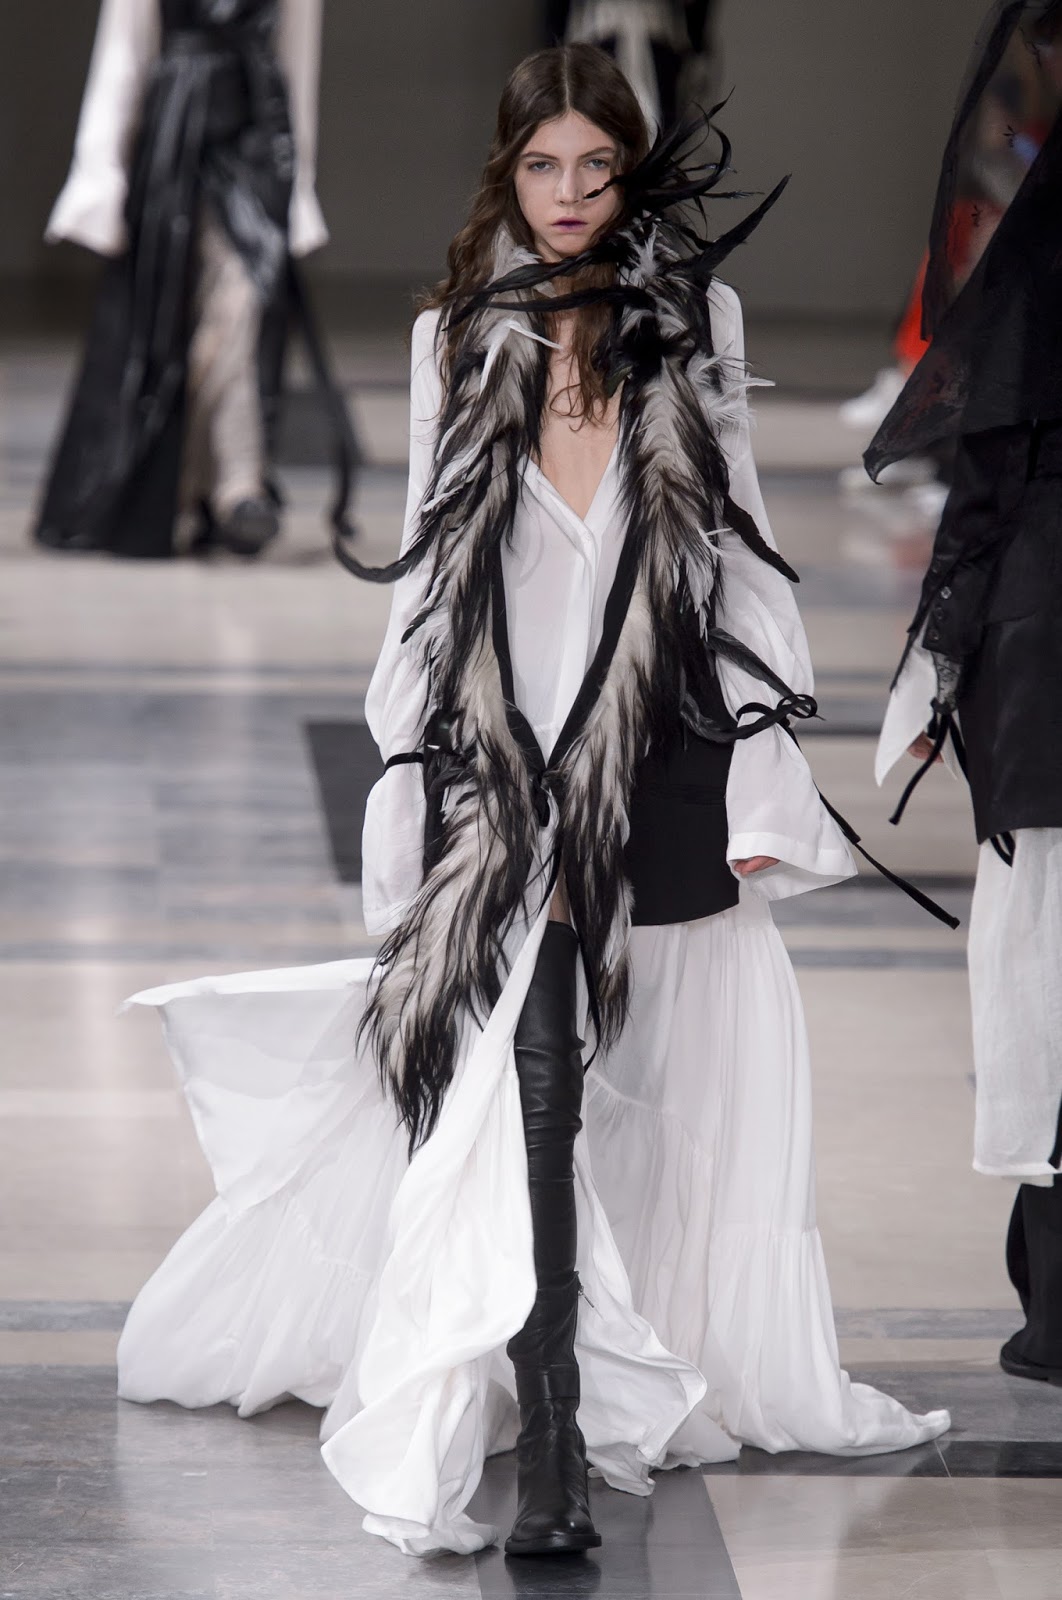 FEATHERS AND FLOW: ANN DEMEULEMEESTER